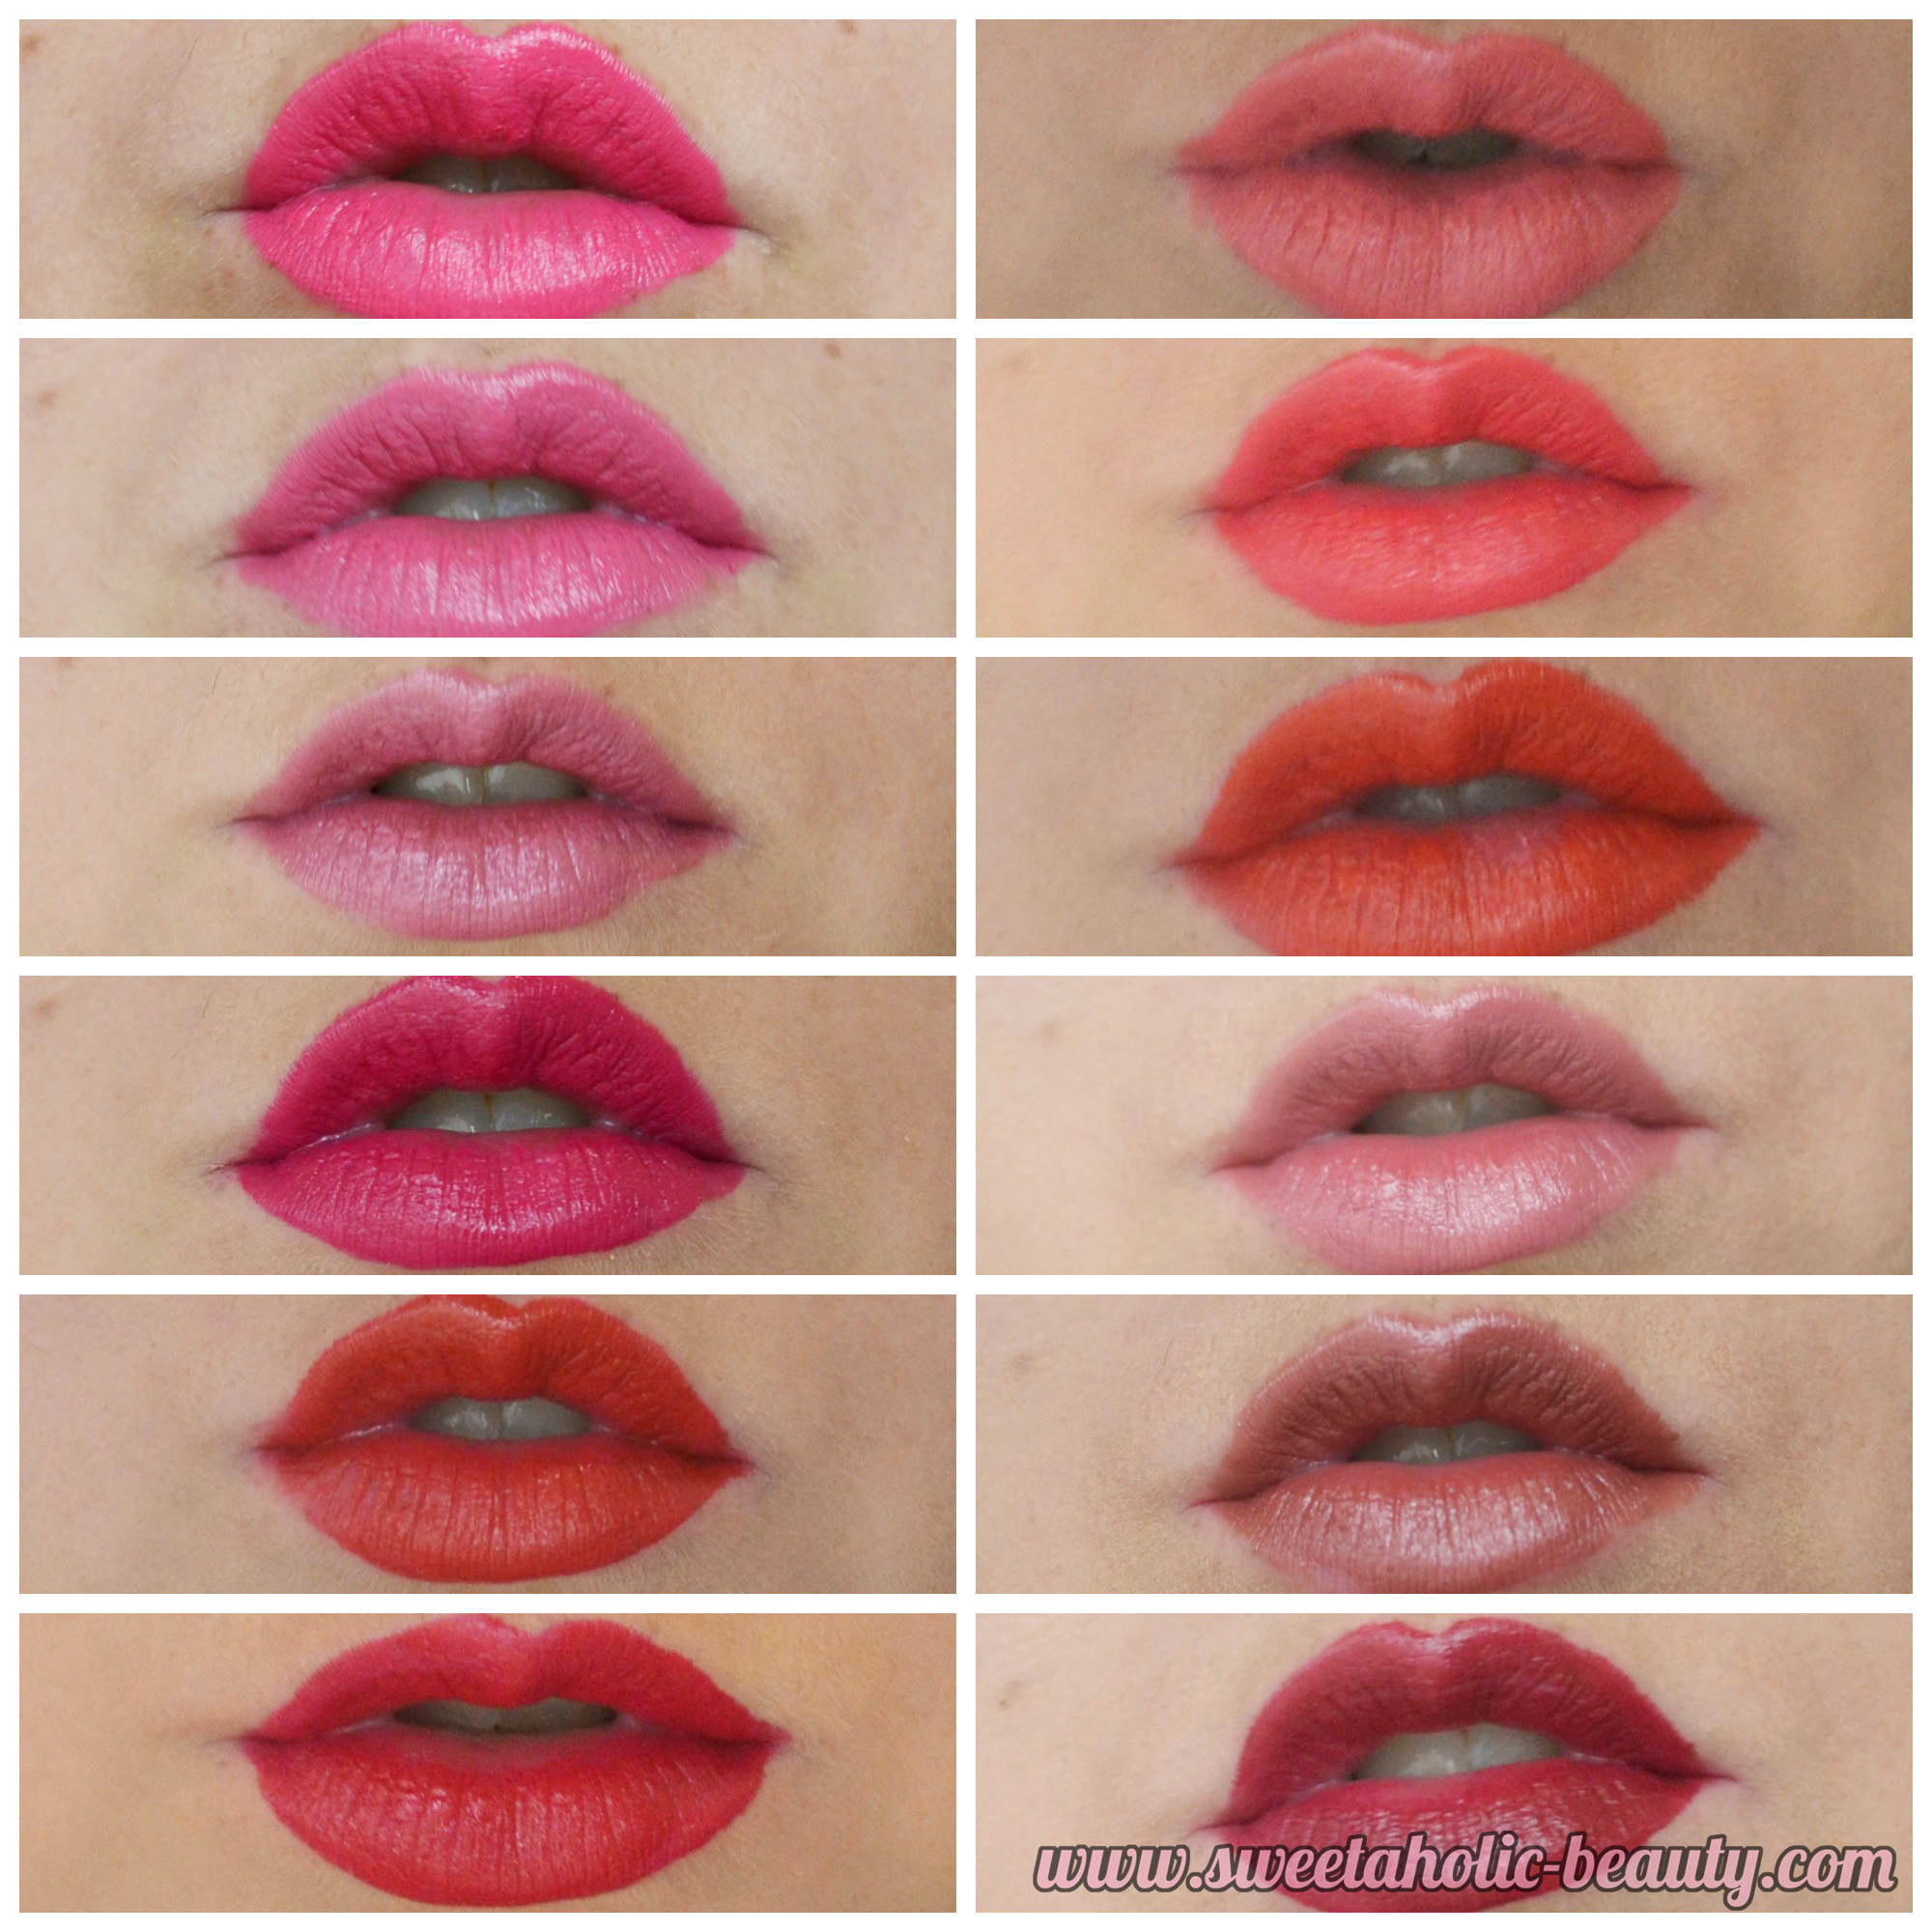 Rimmel London The Only One Lipstick Collection Review & Swatches - Sweetaholic Beauty